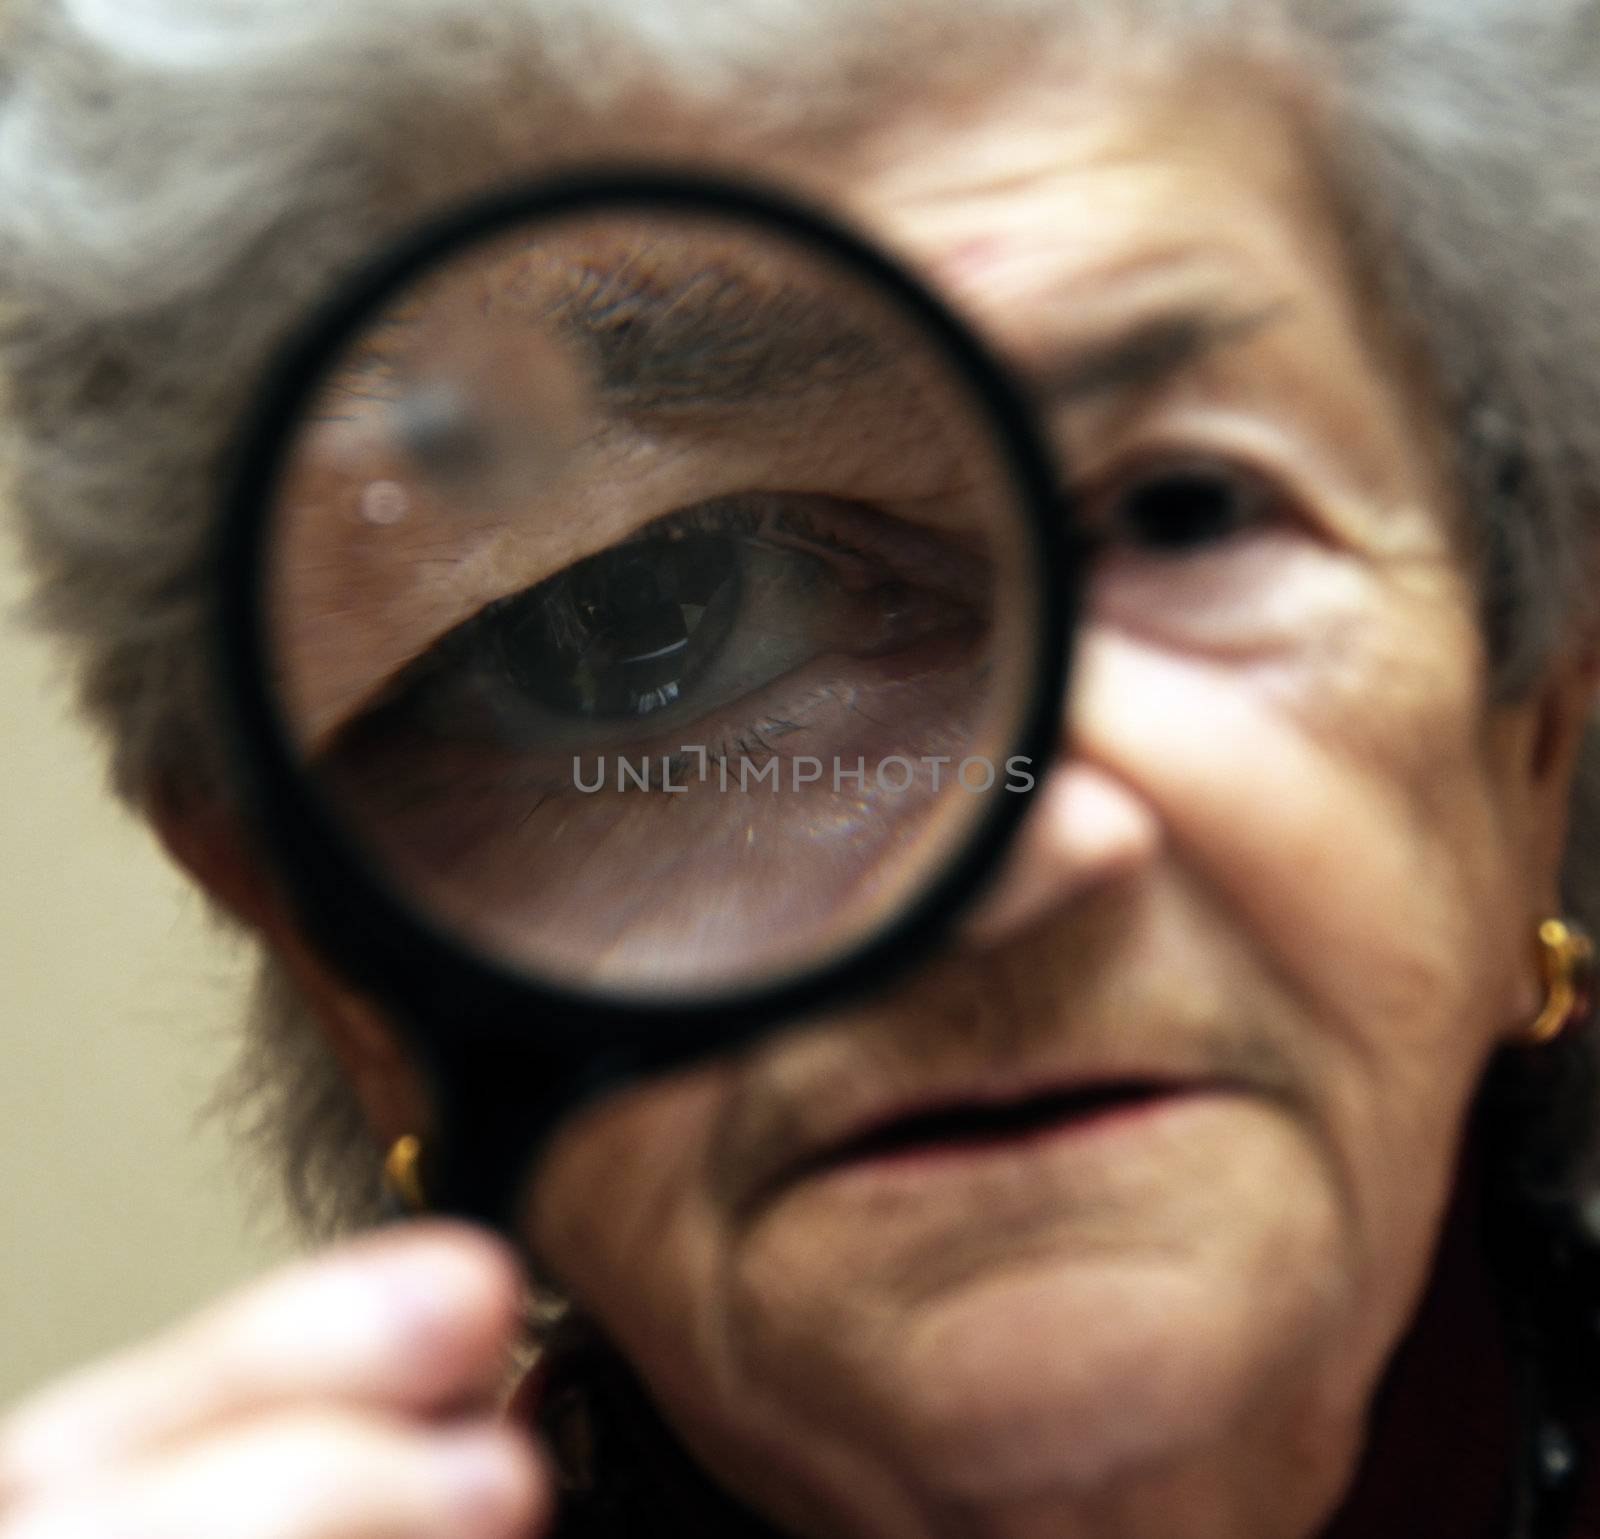 magnifying glass by fahrner